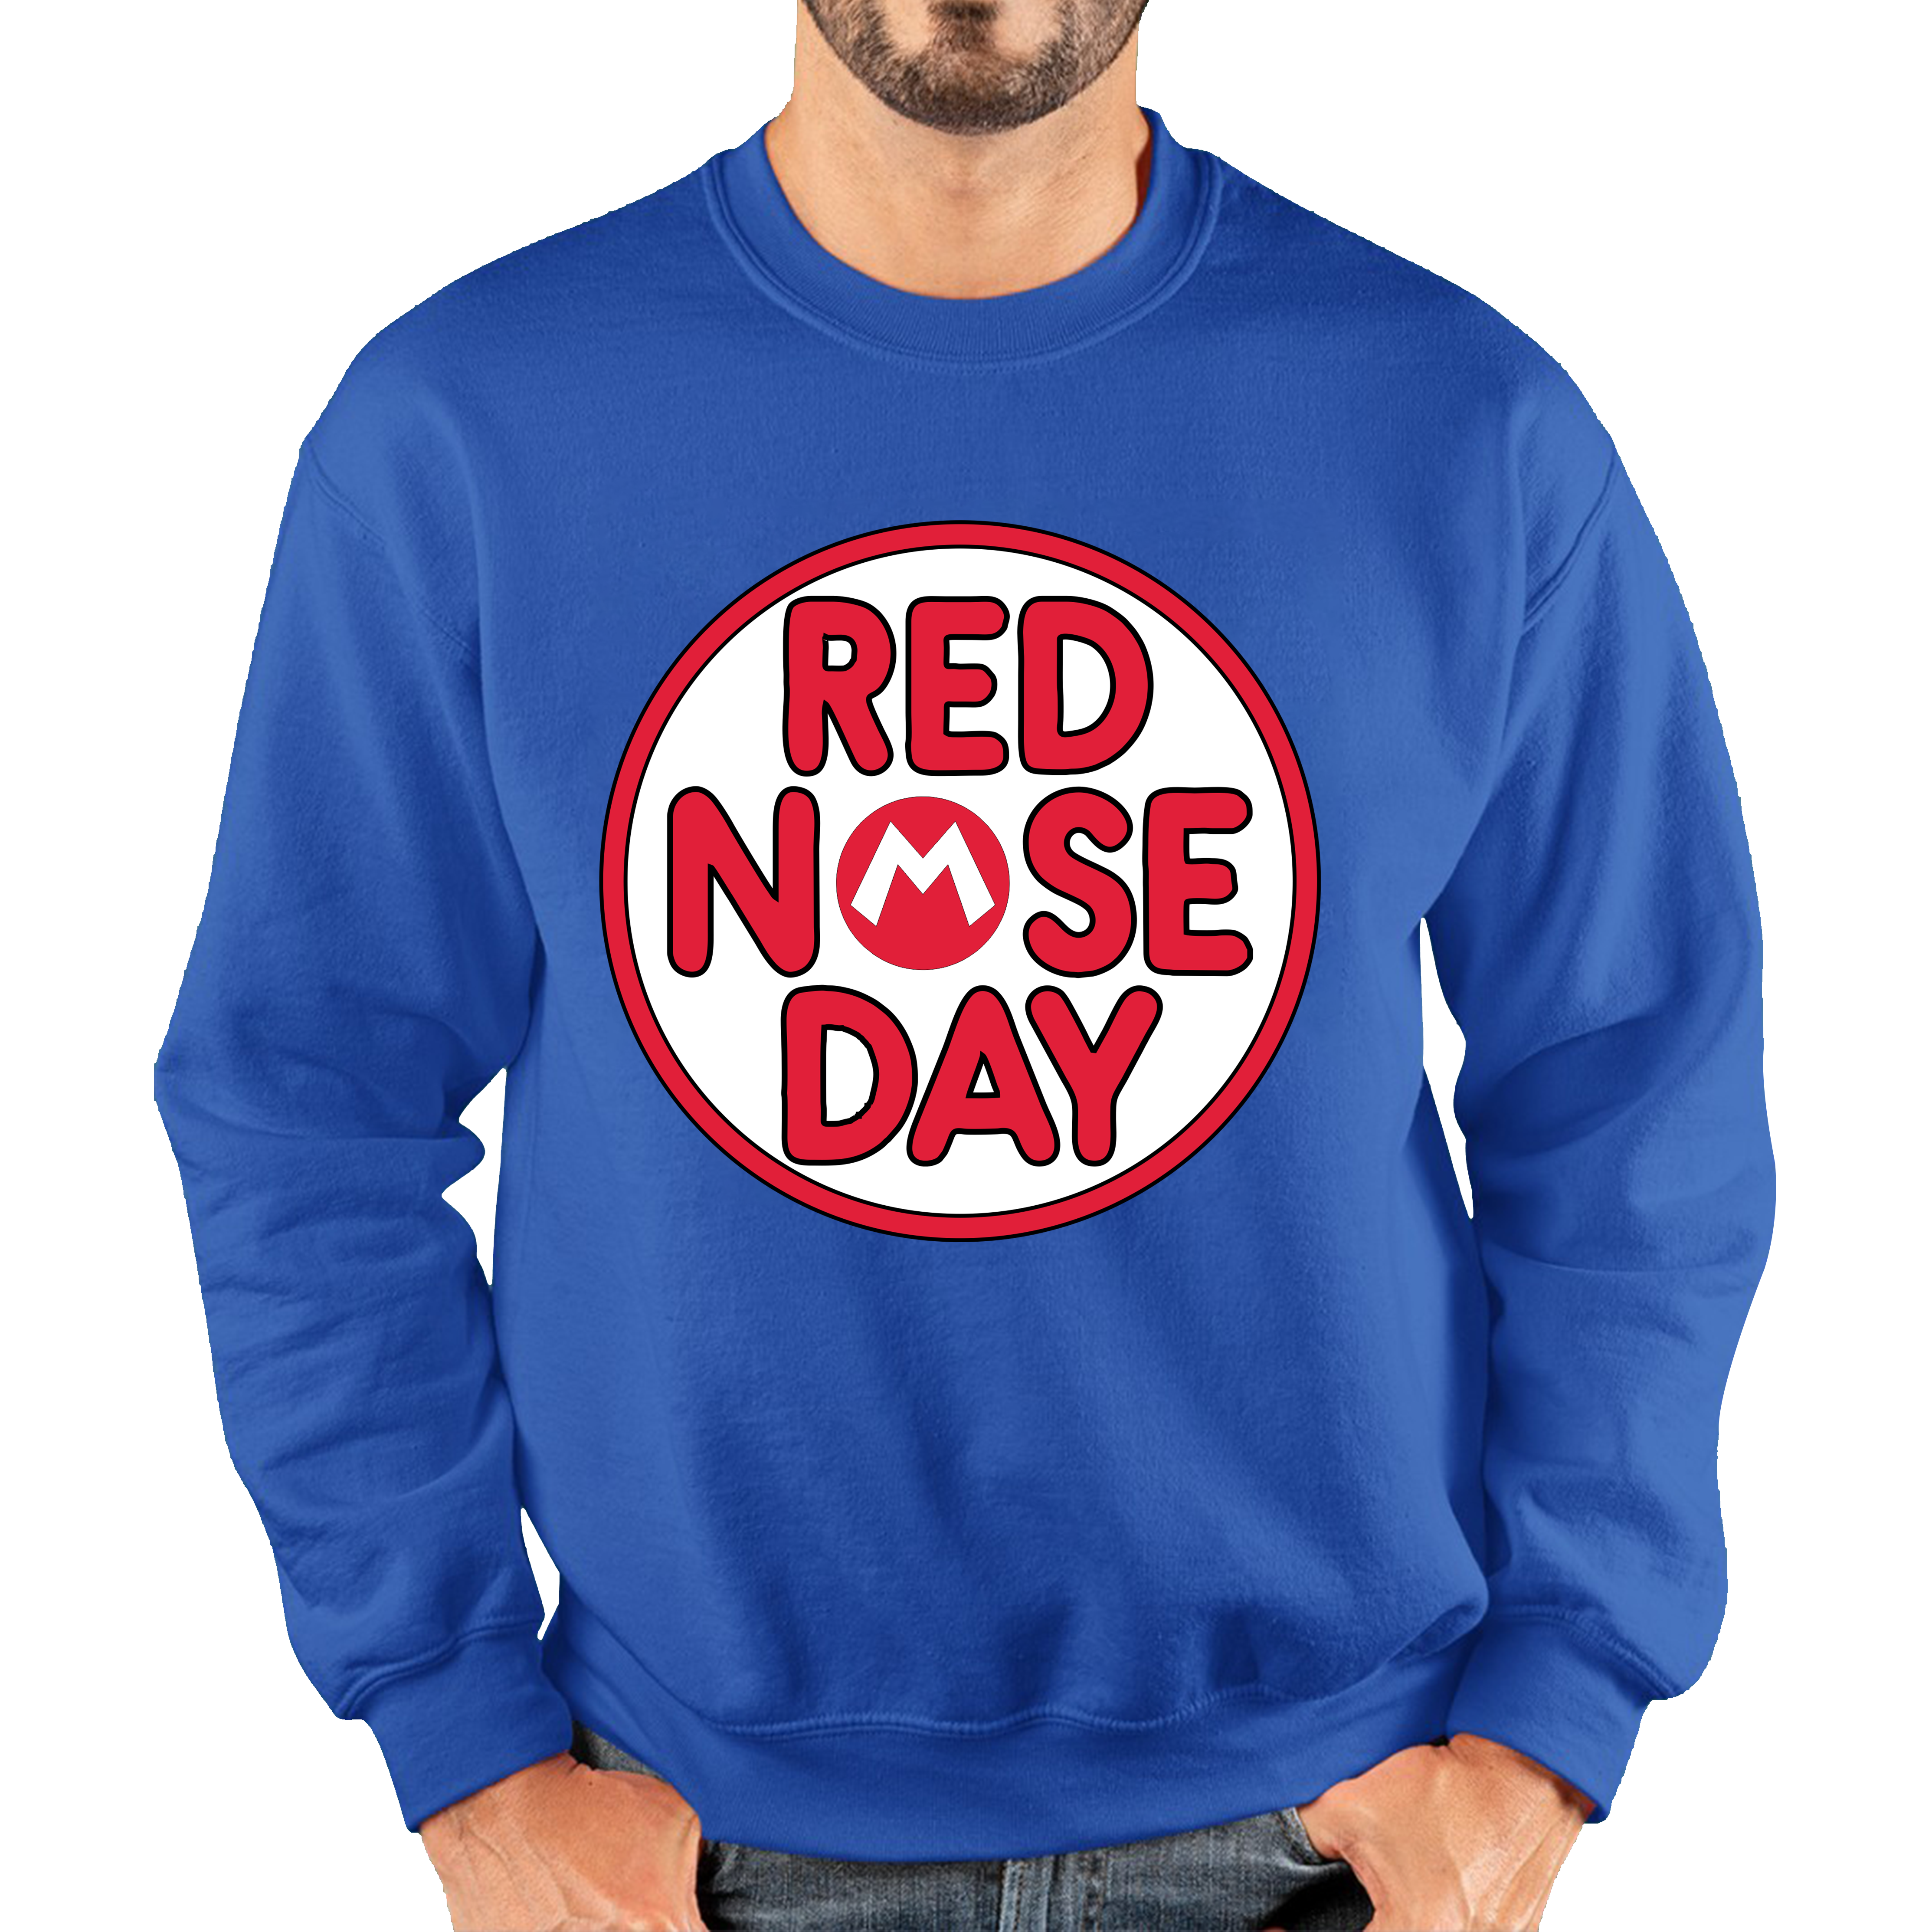 Super Mario Red Nose Day Adult Sweatshirt. 50% Goes To Charity